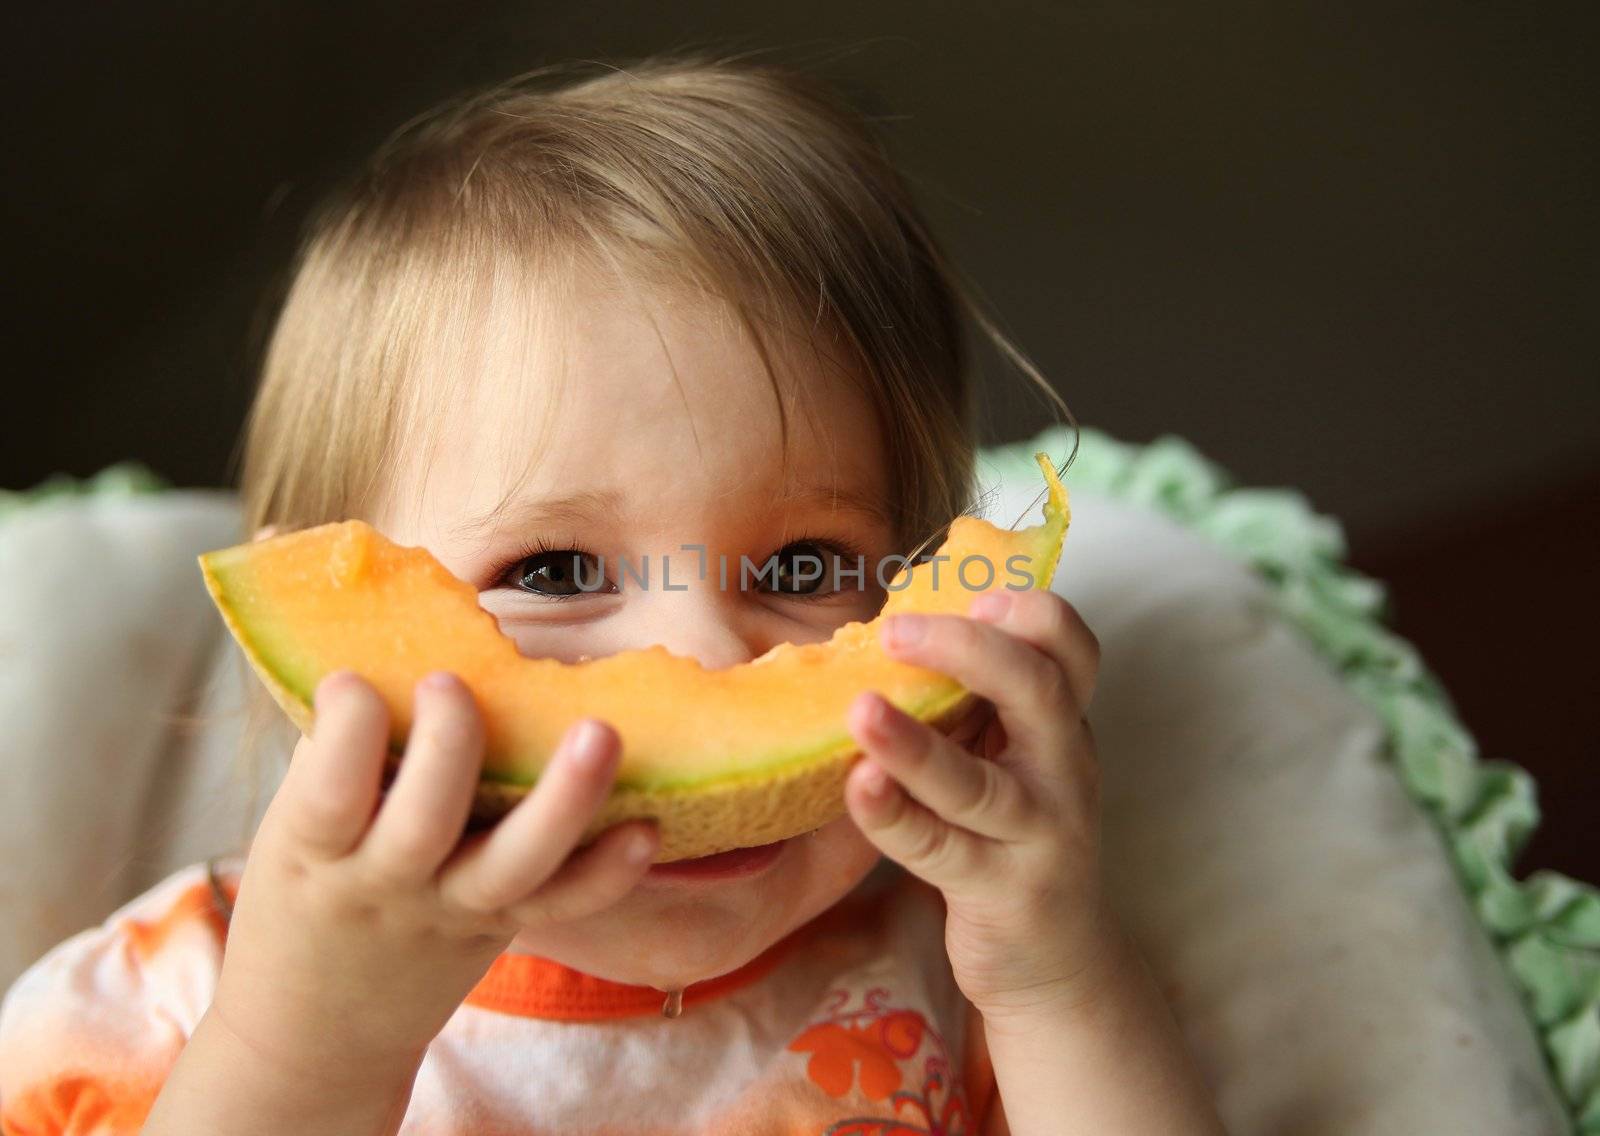 Young baby girl sitting in a high chair eating a wedge of cantaloupe with juice dripping off her chin.